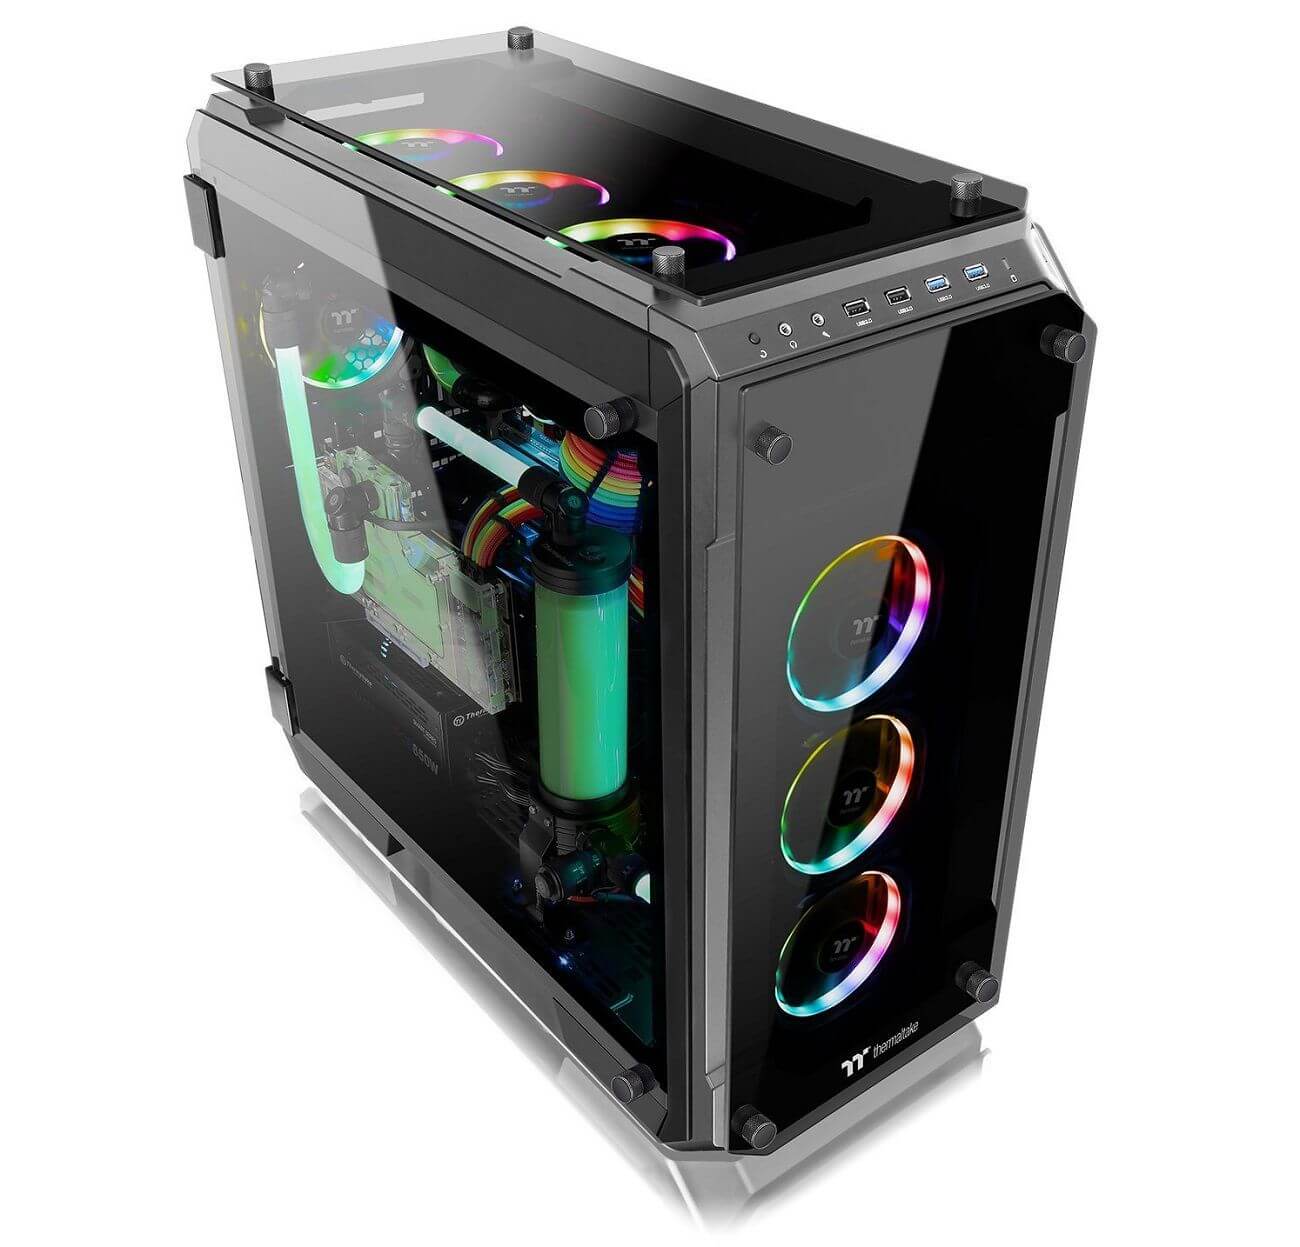 Best PC cases for a new PC to buy [2020 Guide]